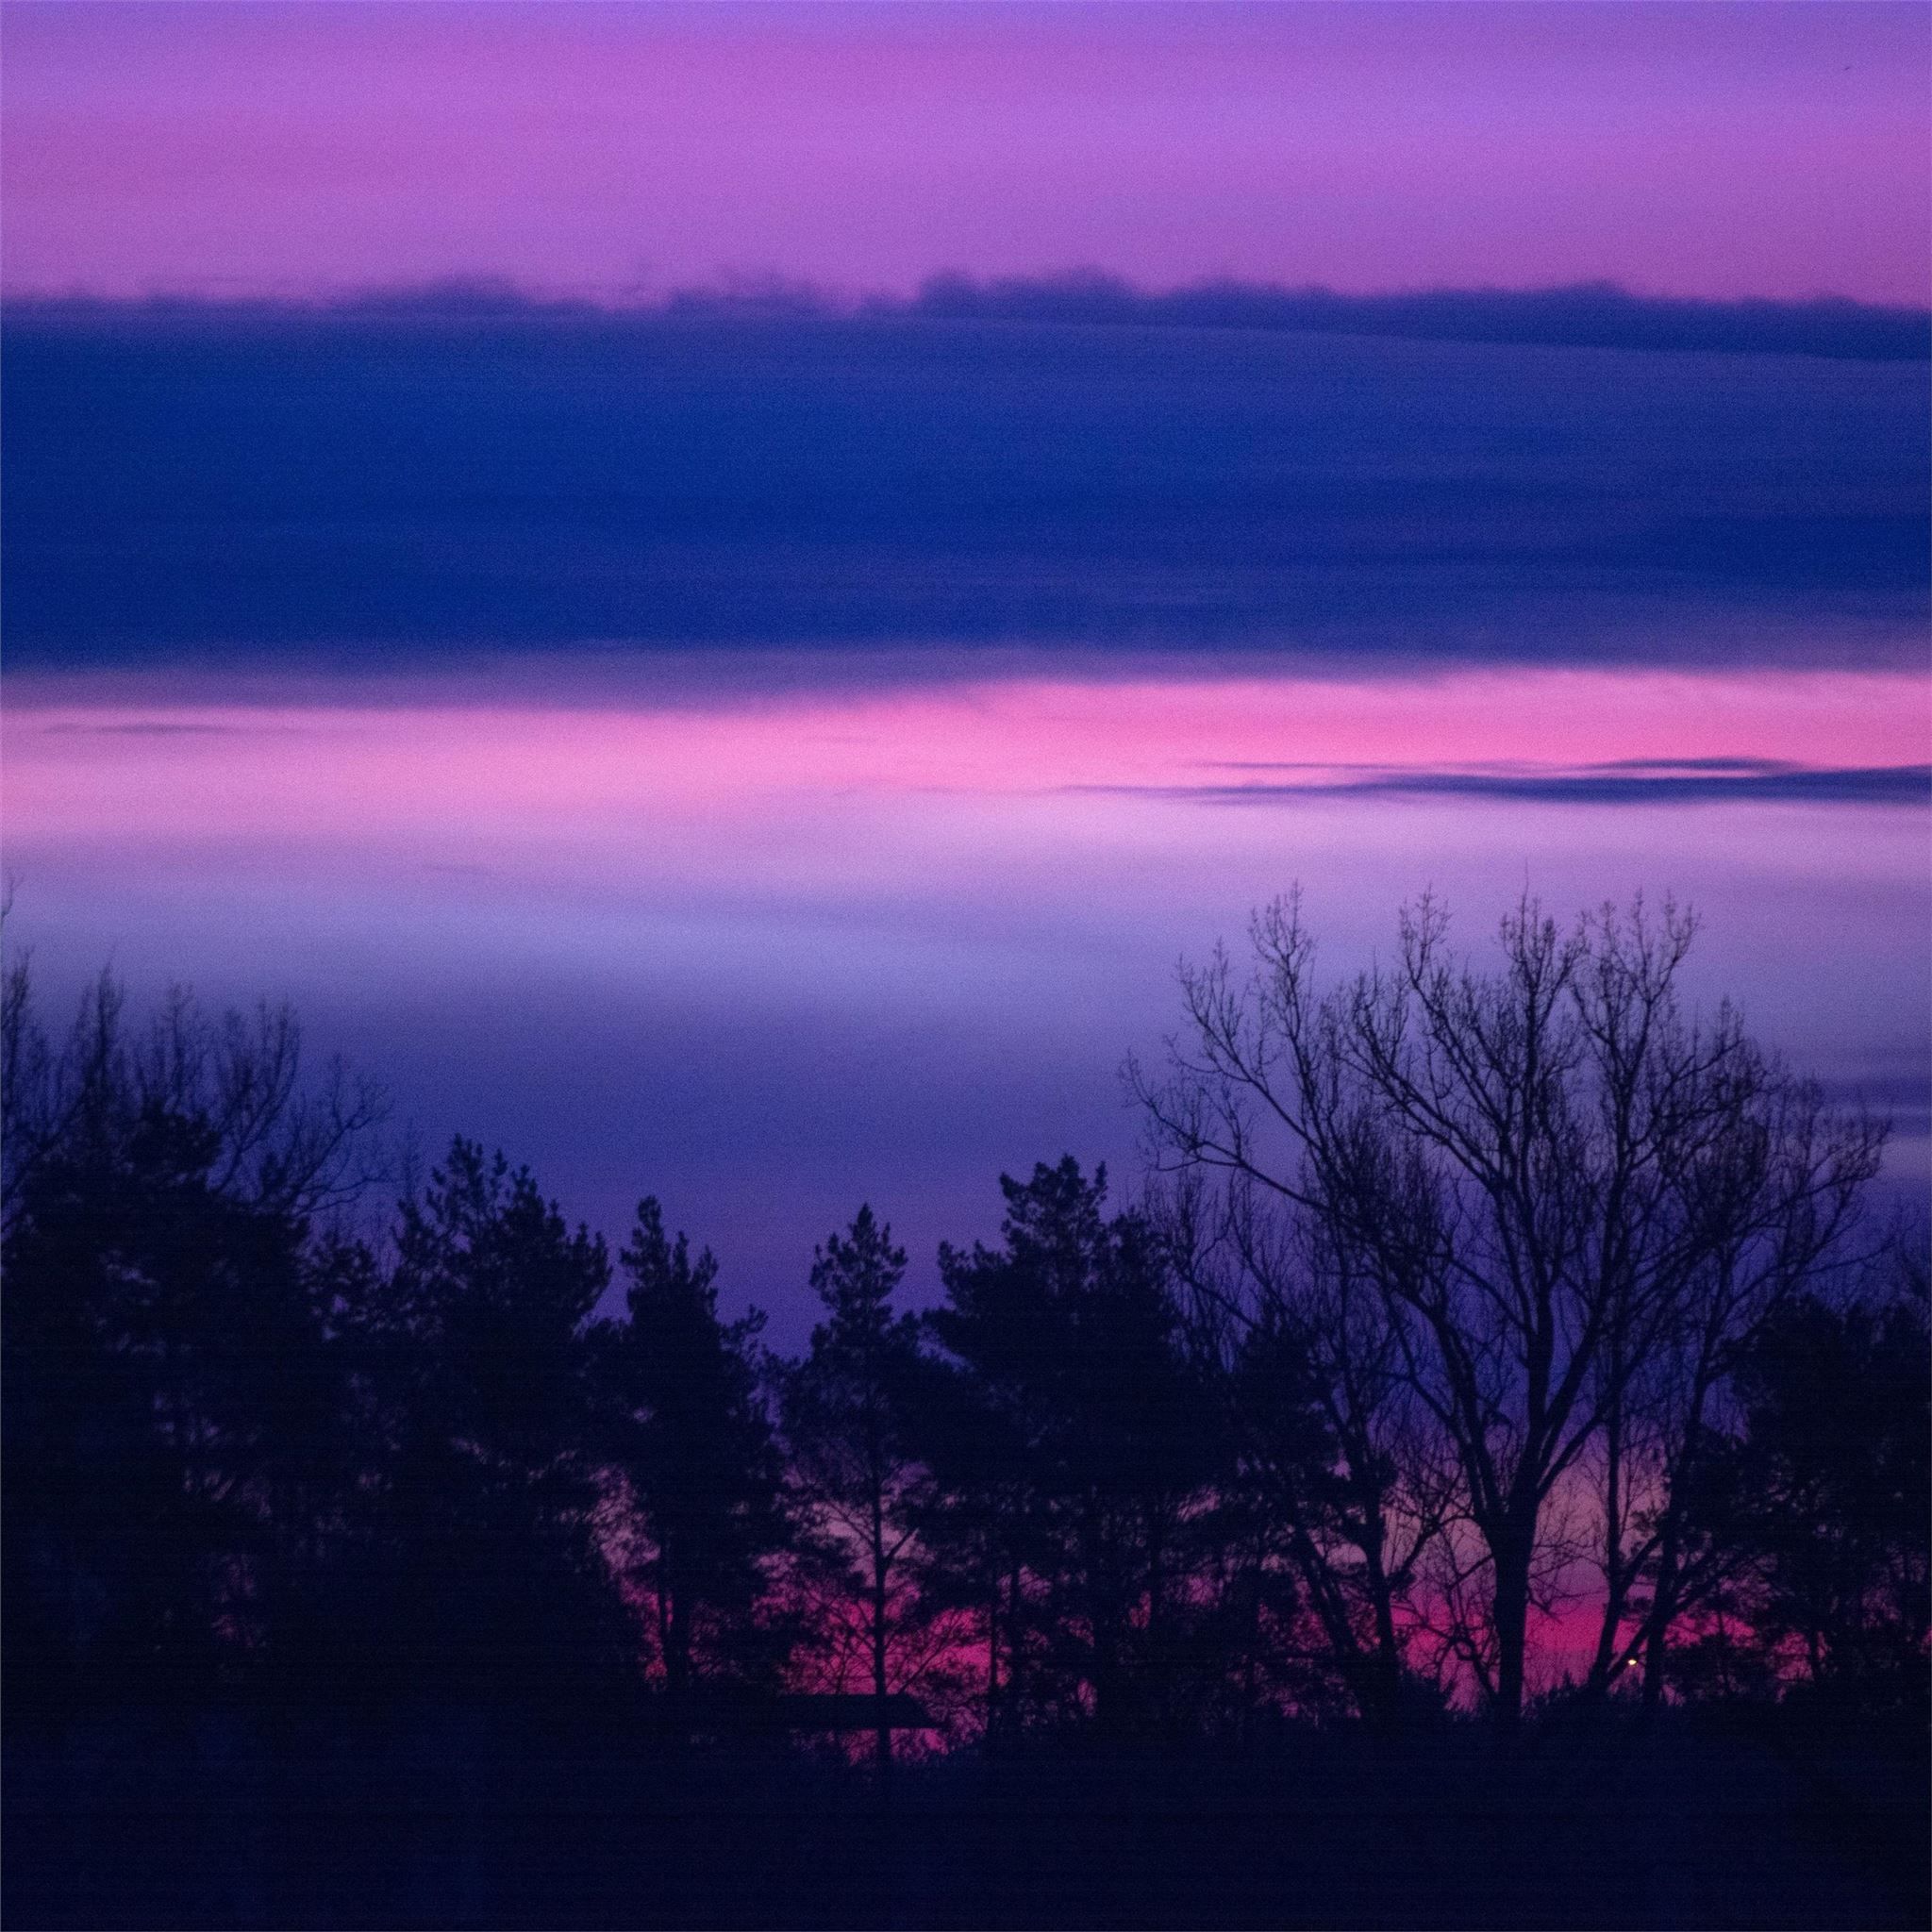 A purple and blue sunset with trees in the foreground. - Landscape